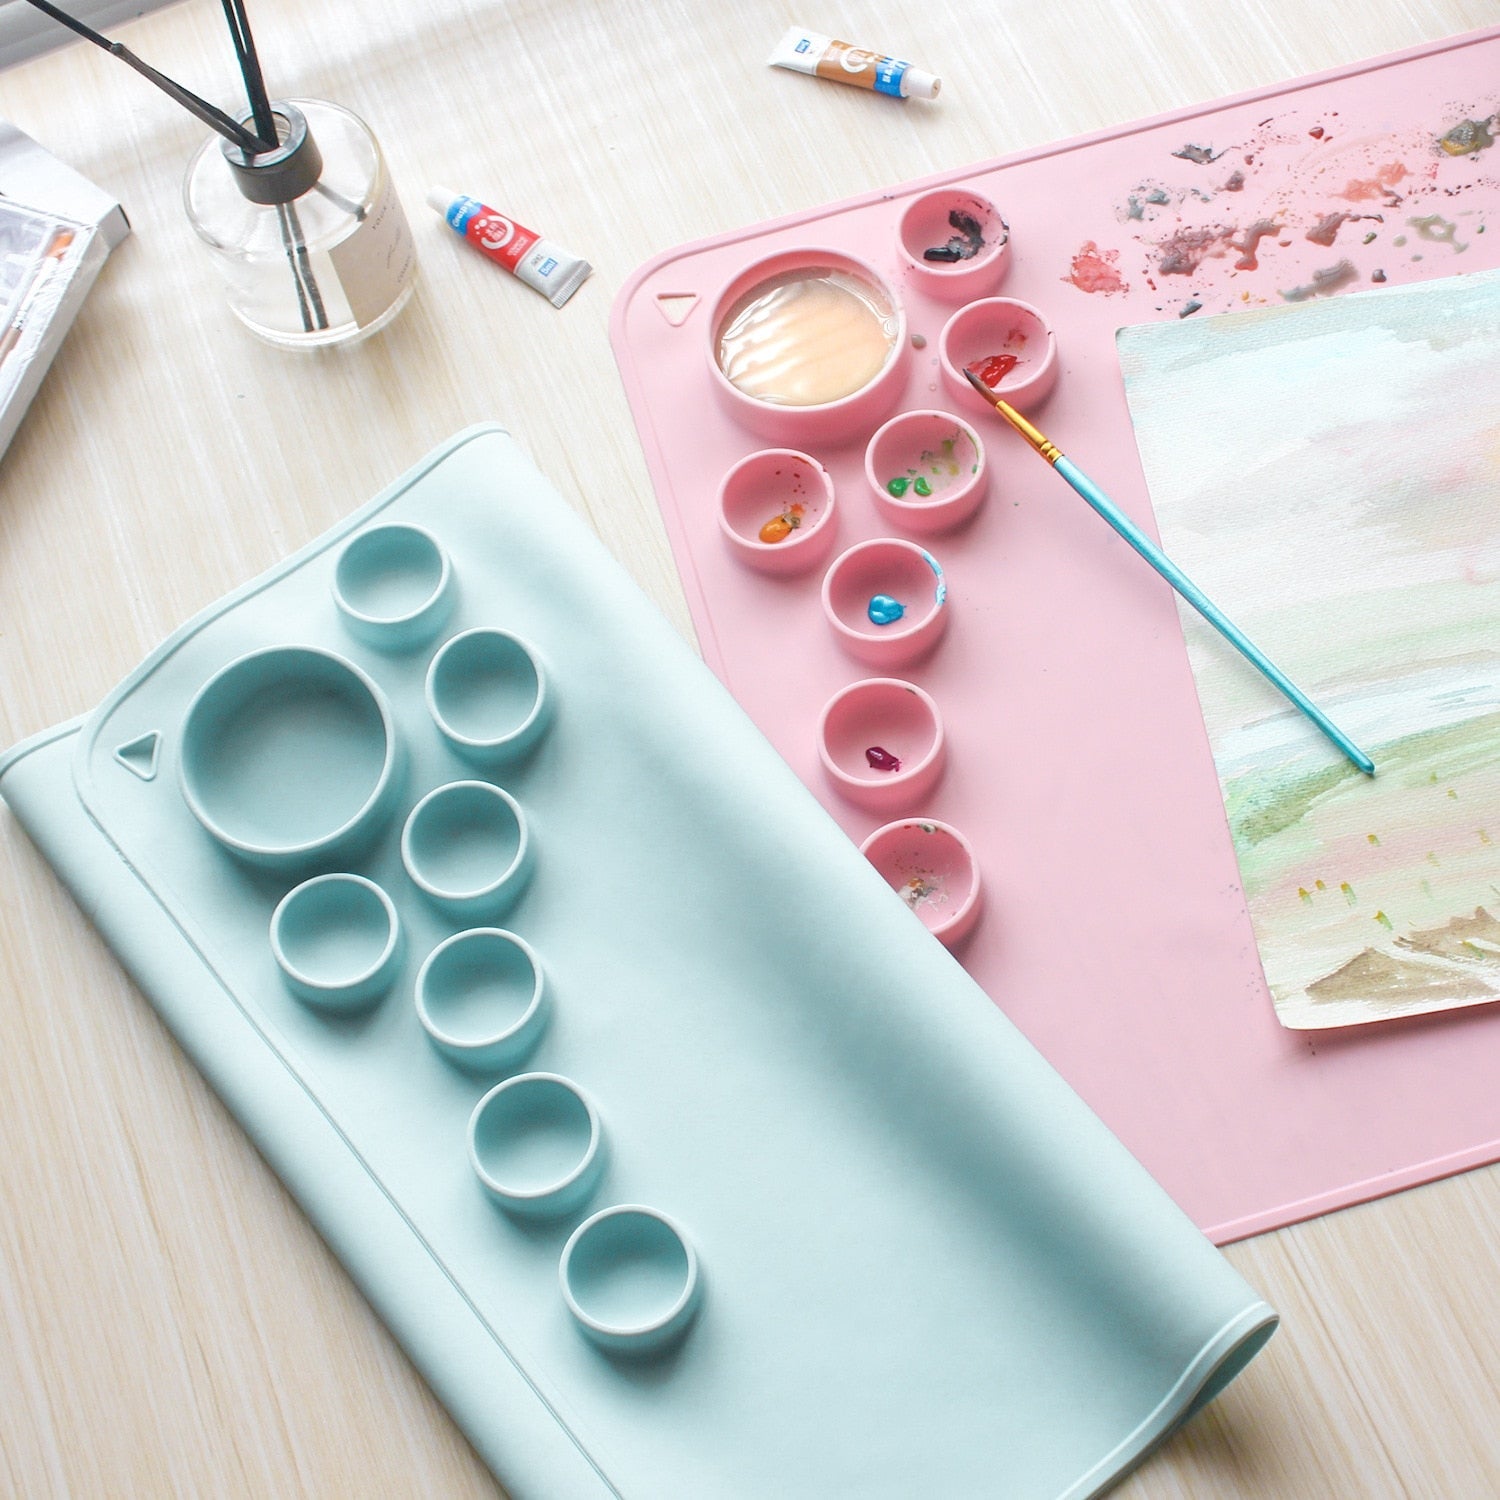 Large Silicone Craft Mat For Kids